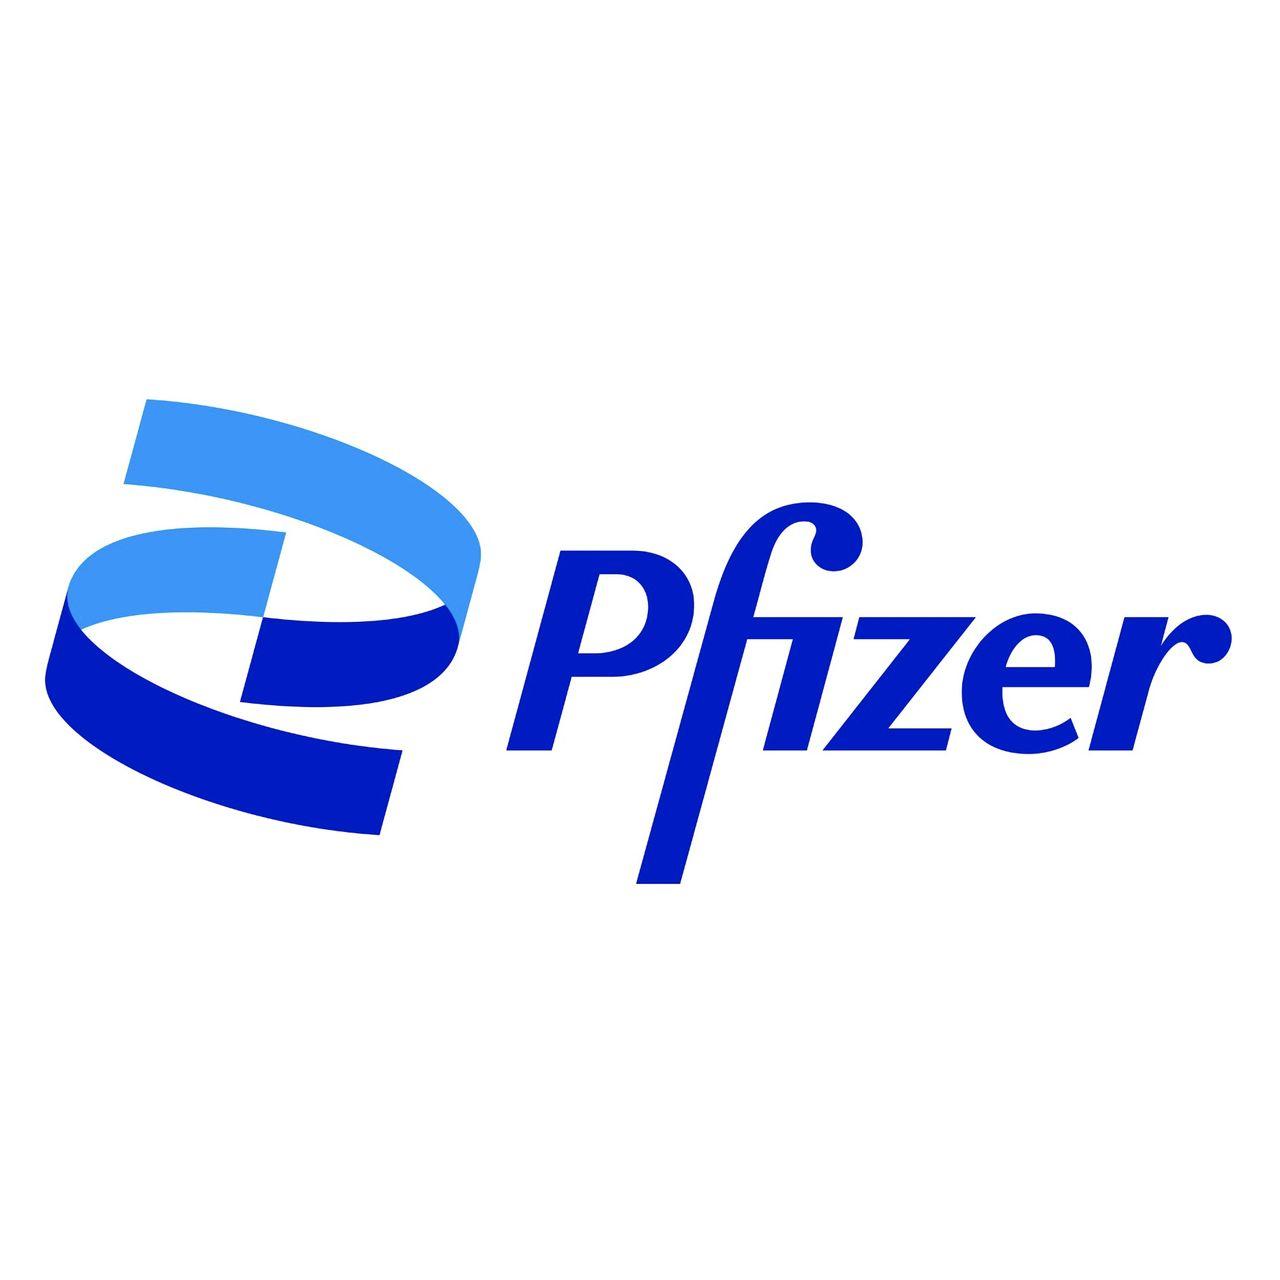 Pfizer Introduces New Logo Playing Up Role in Drug Creation - WSJ